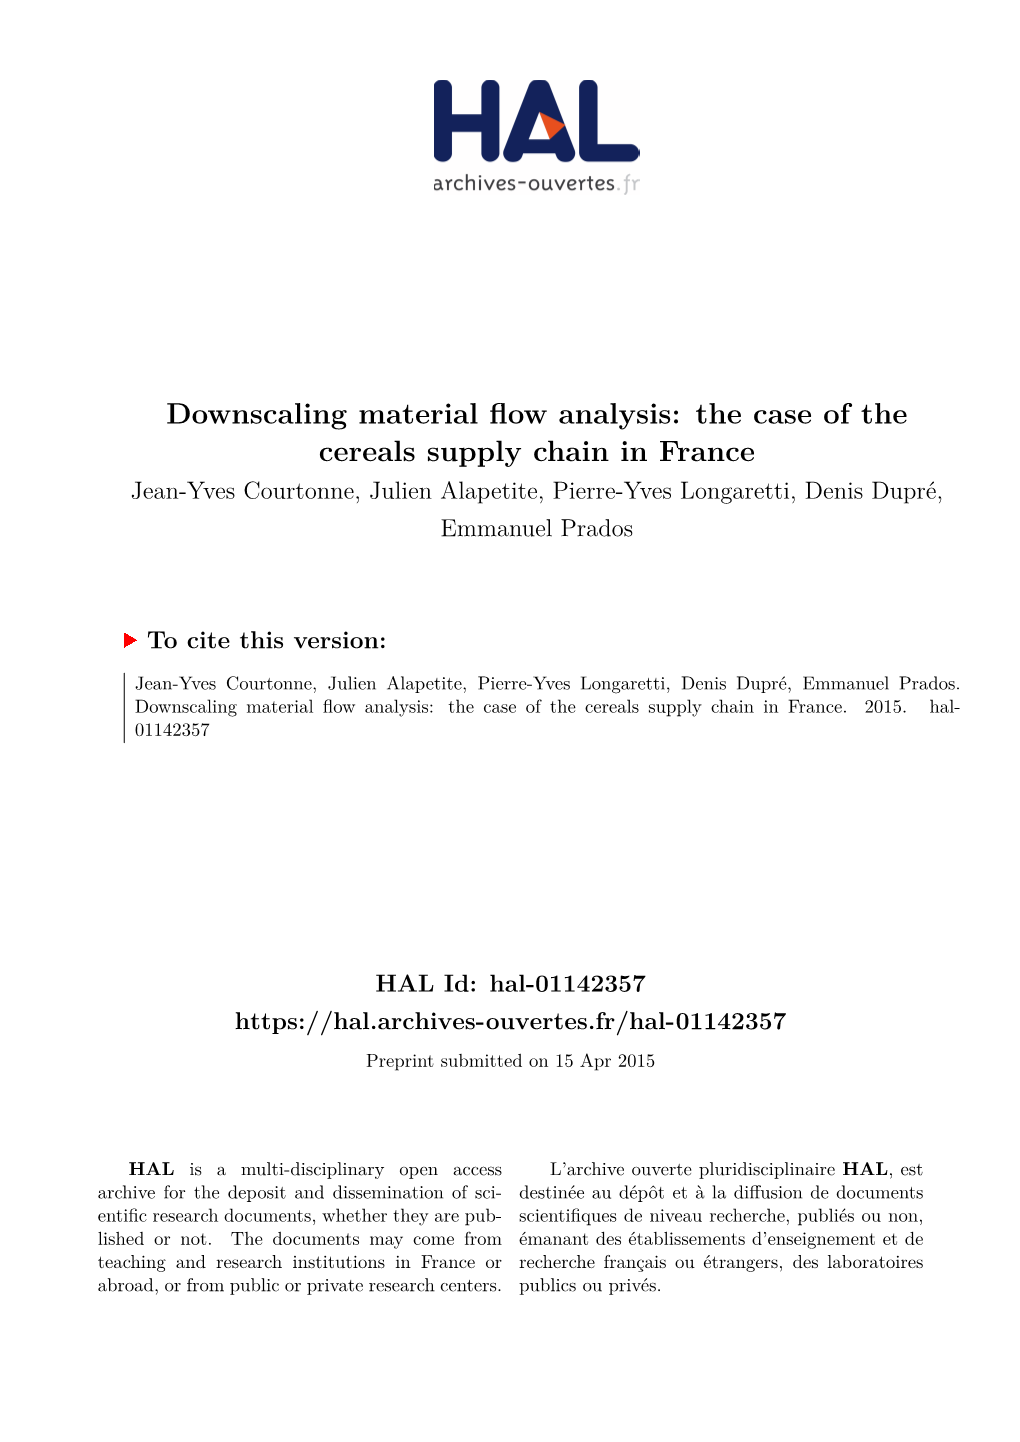 Downscaling Material Flow Analysis: the Case of the Cereals Supply Chain